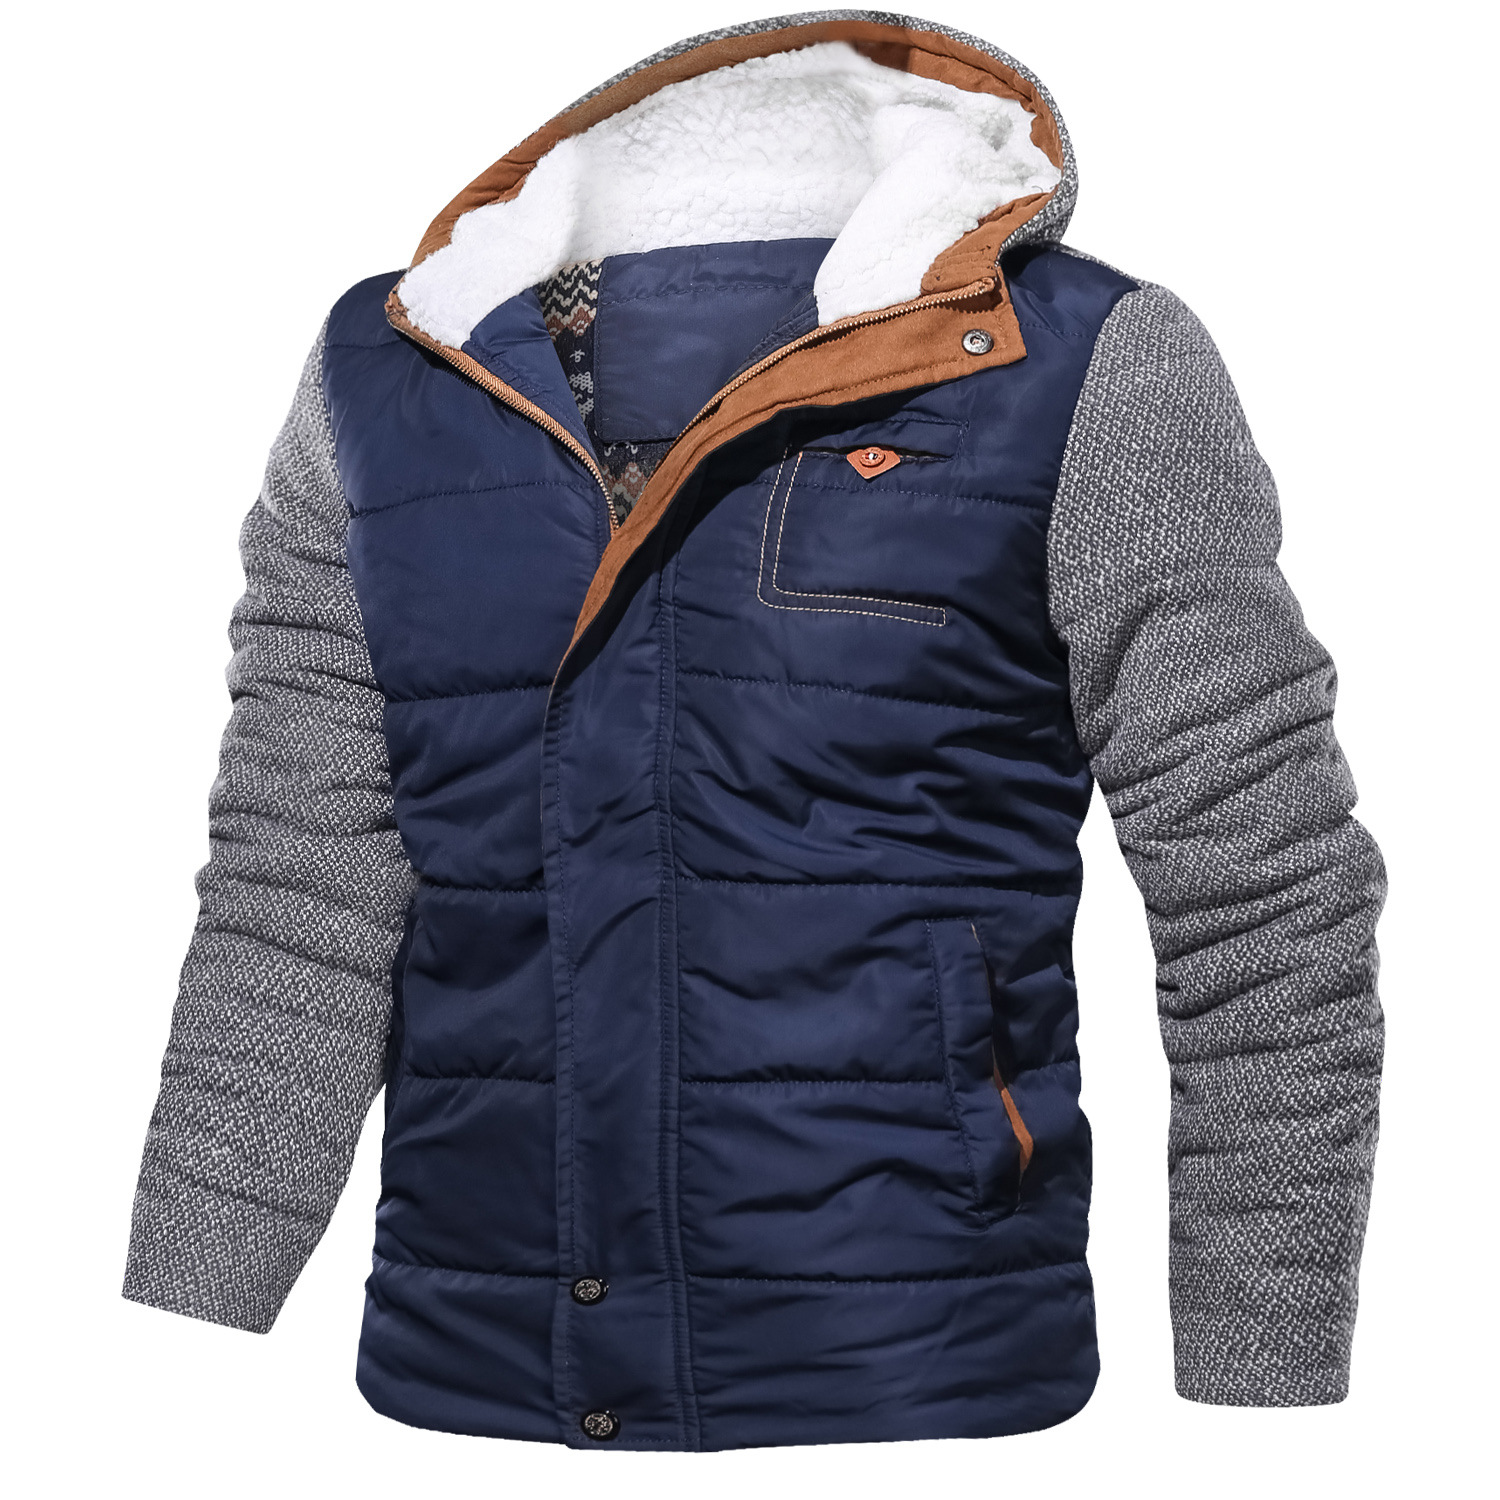 Men's Casual Stitching Warm Chic Hooded Cotton Coat